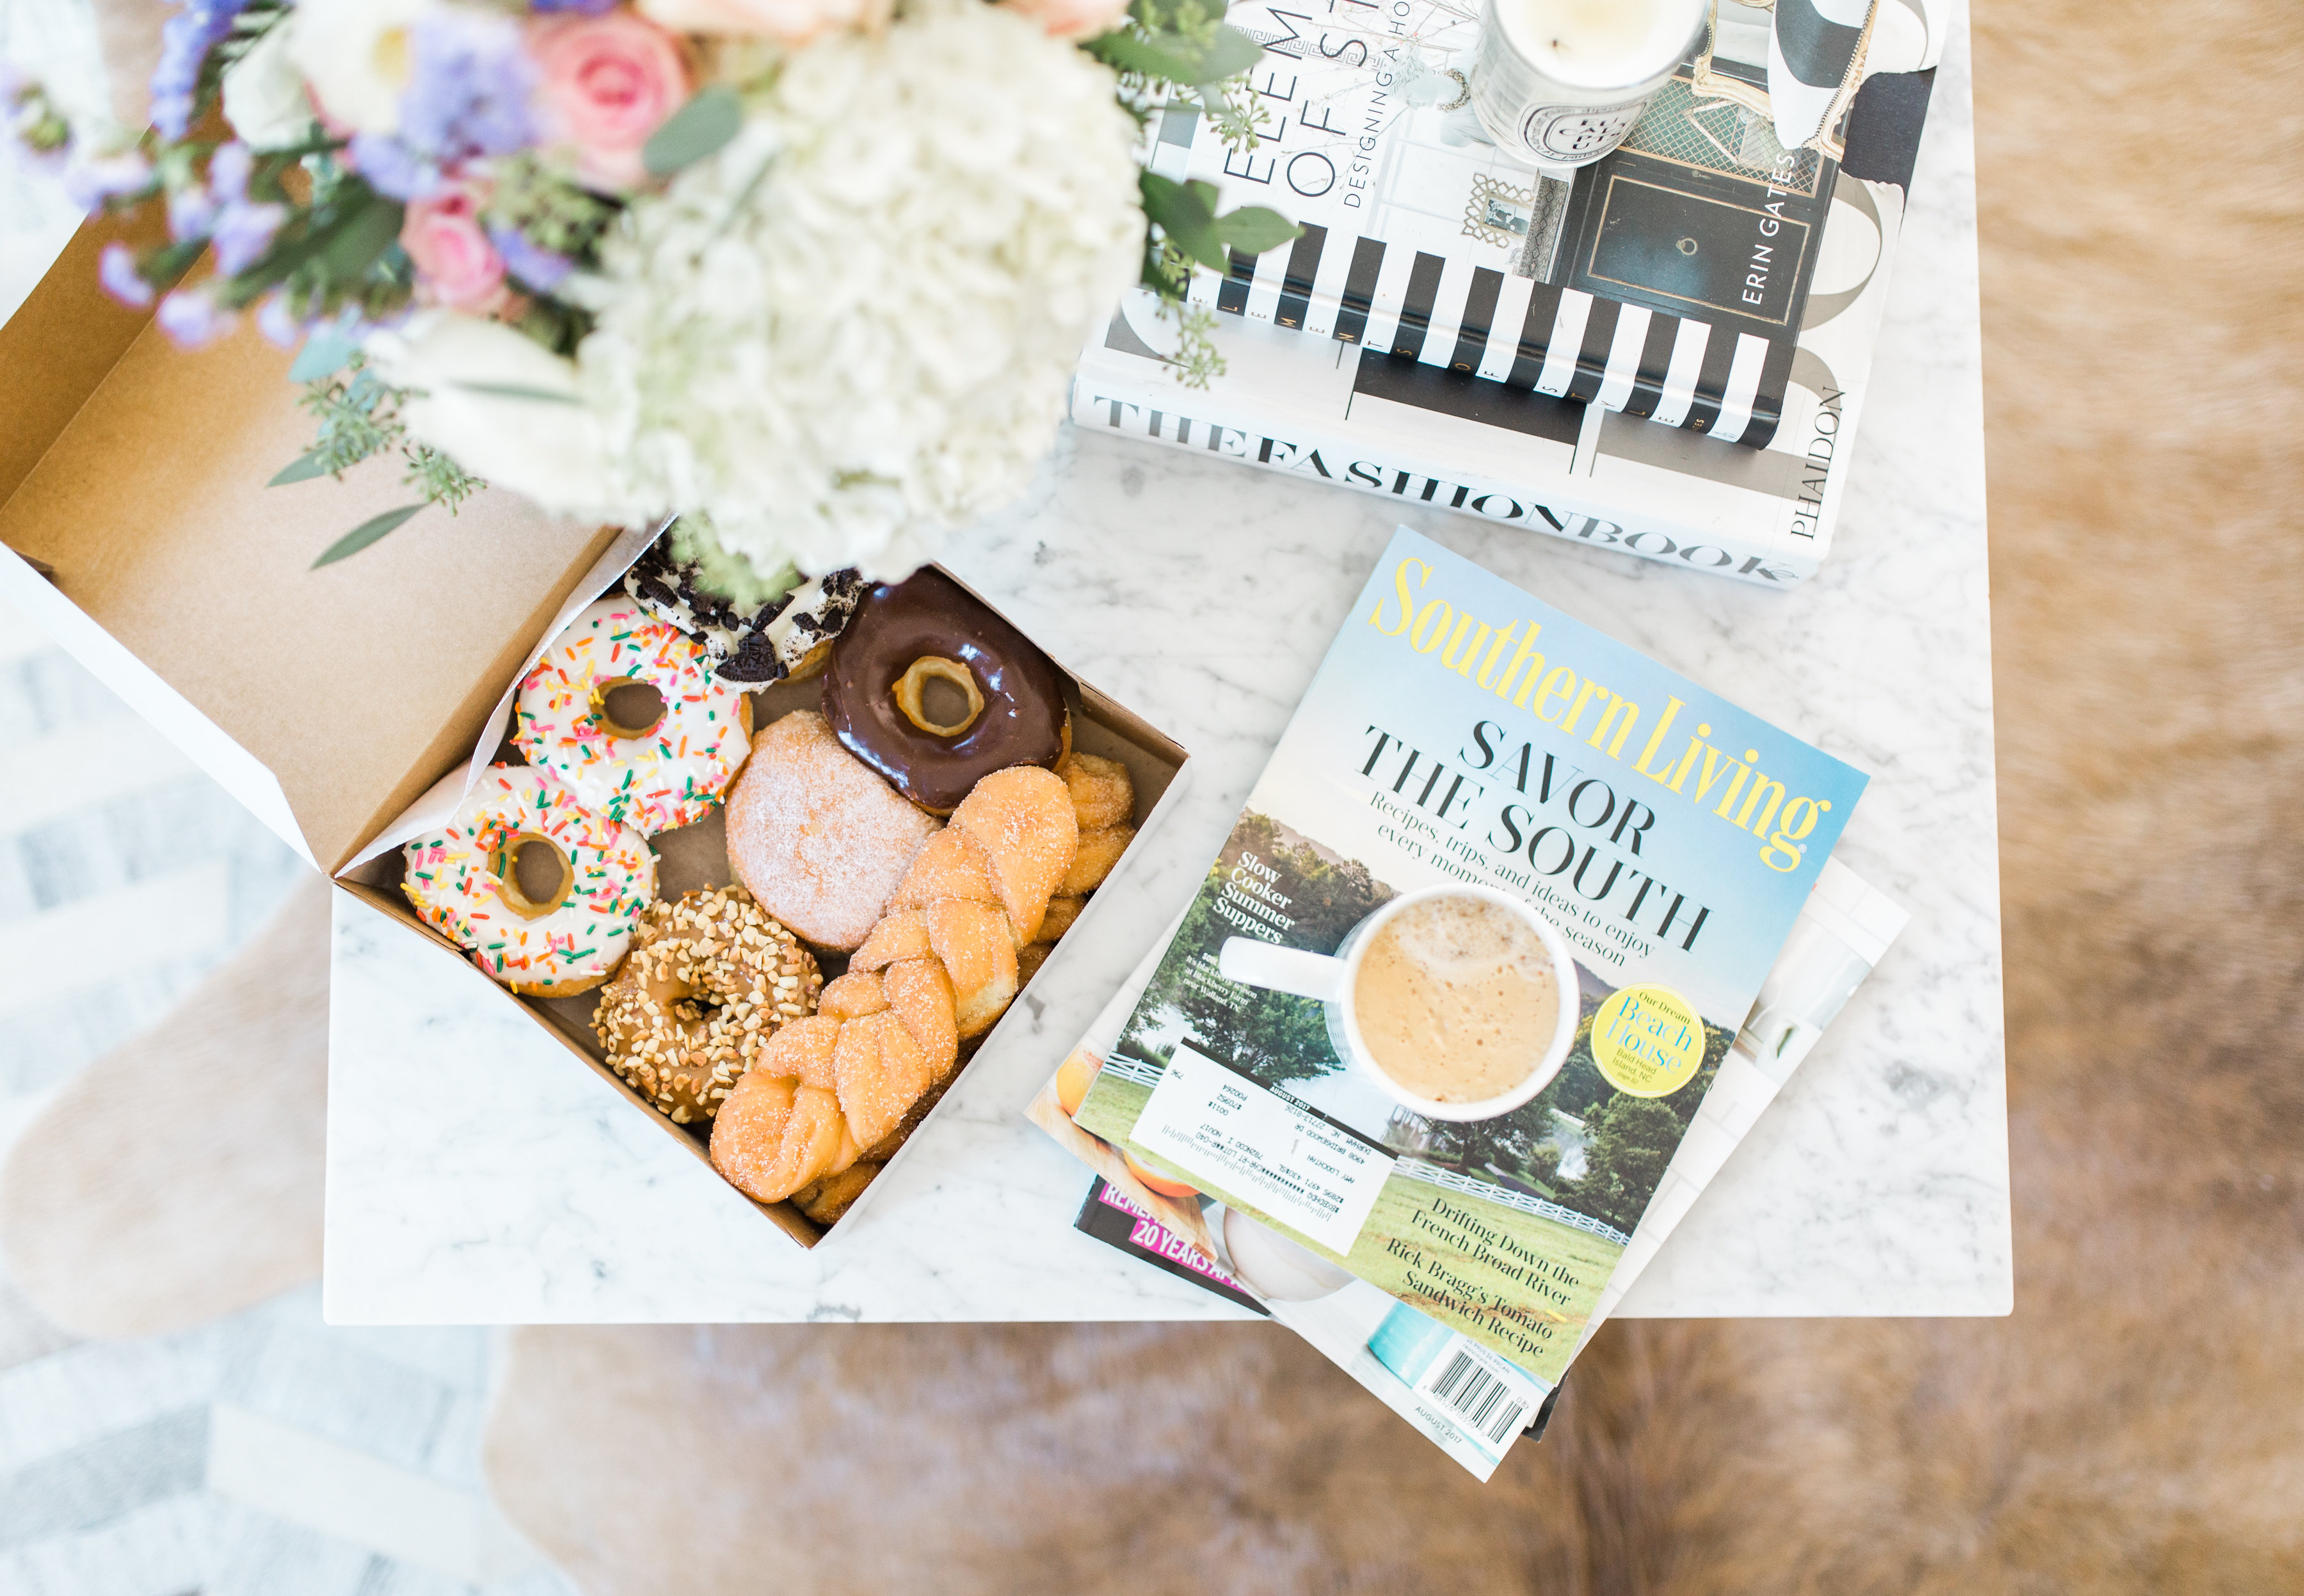 Top 5 Things to Do to Relax by NC lifestyle blogger Coffee Beans and Bobby Pins